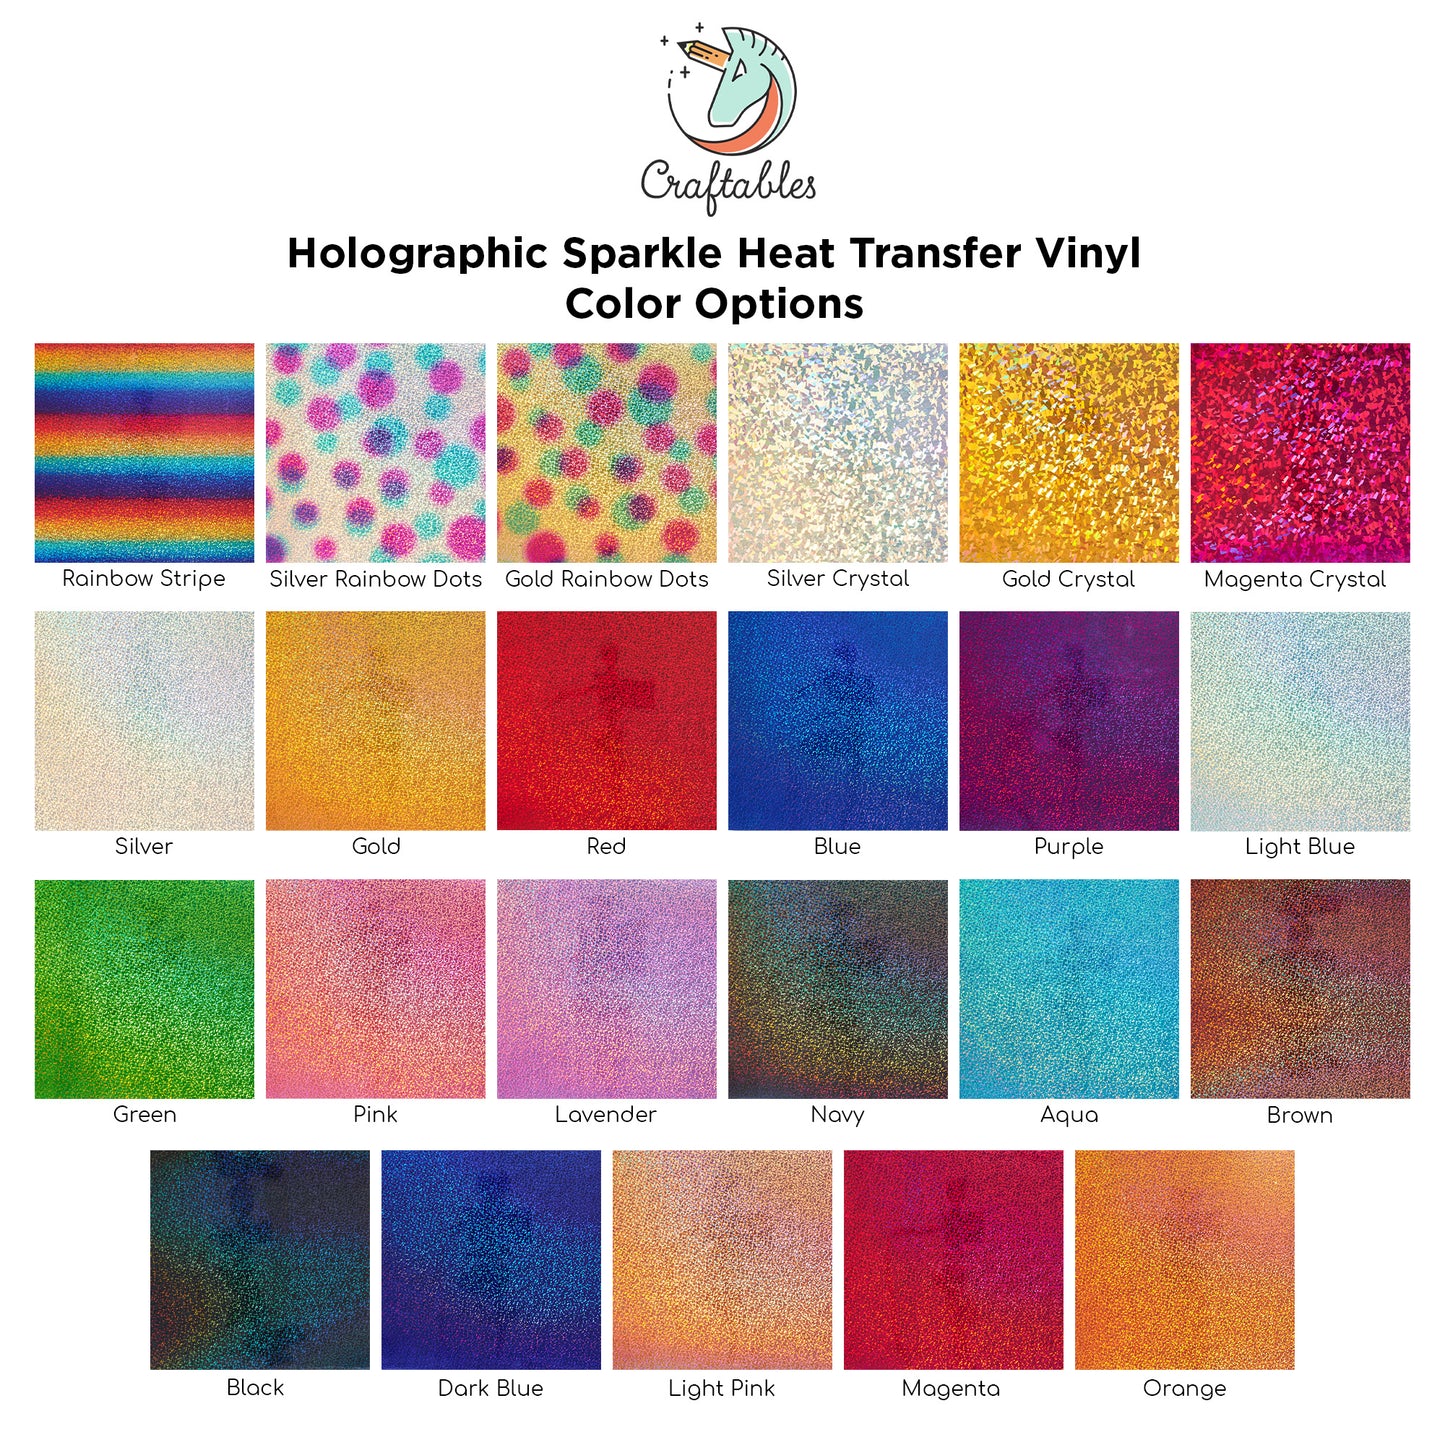 Brown Holographic Sparkle Heat Transfer Vinyl Rolls By Craftables